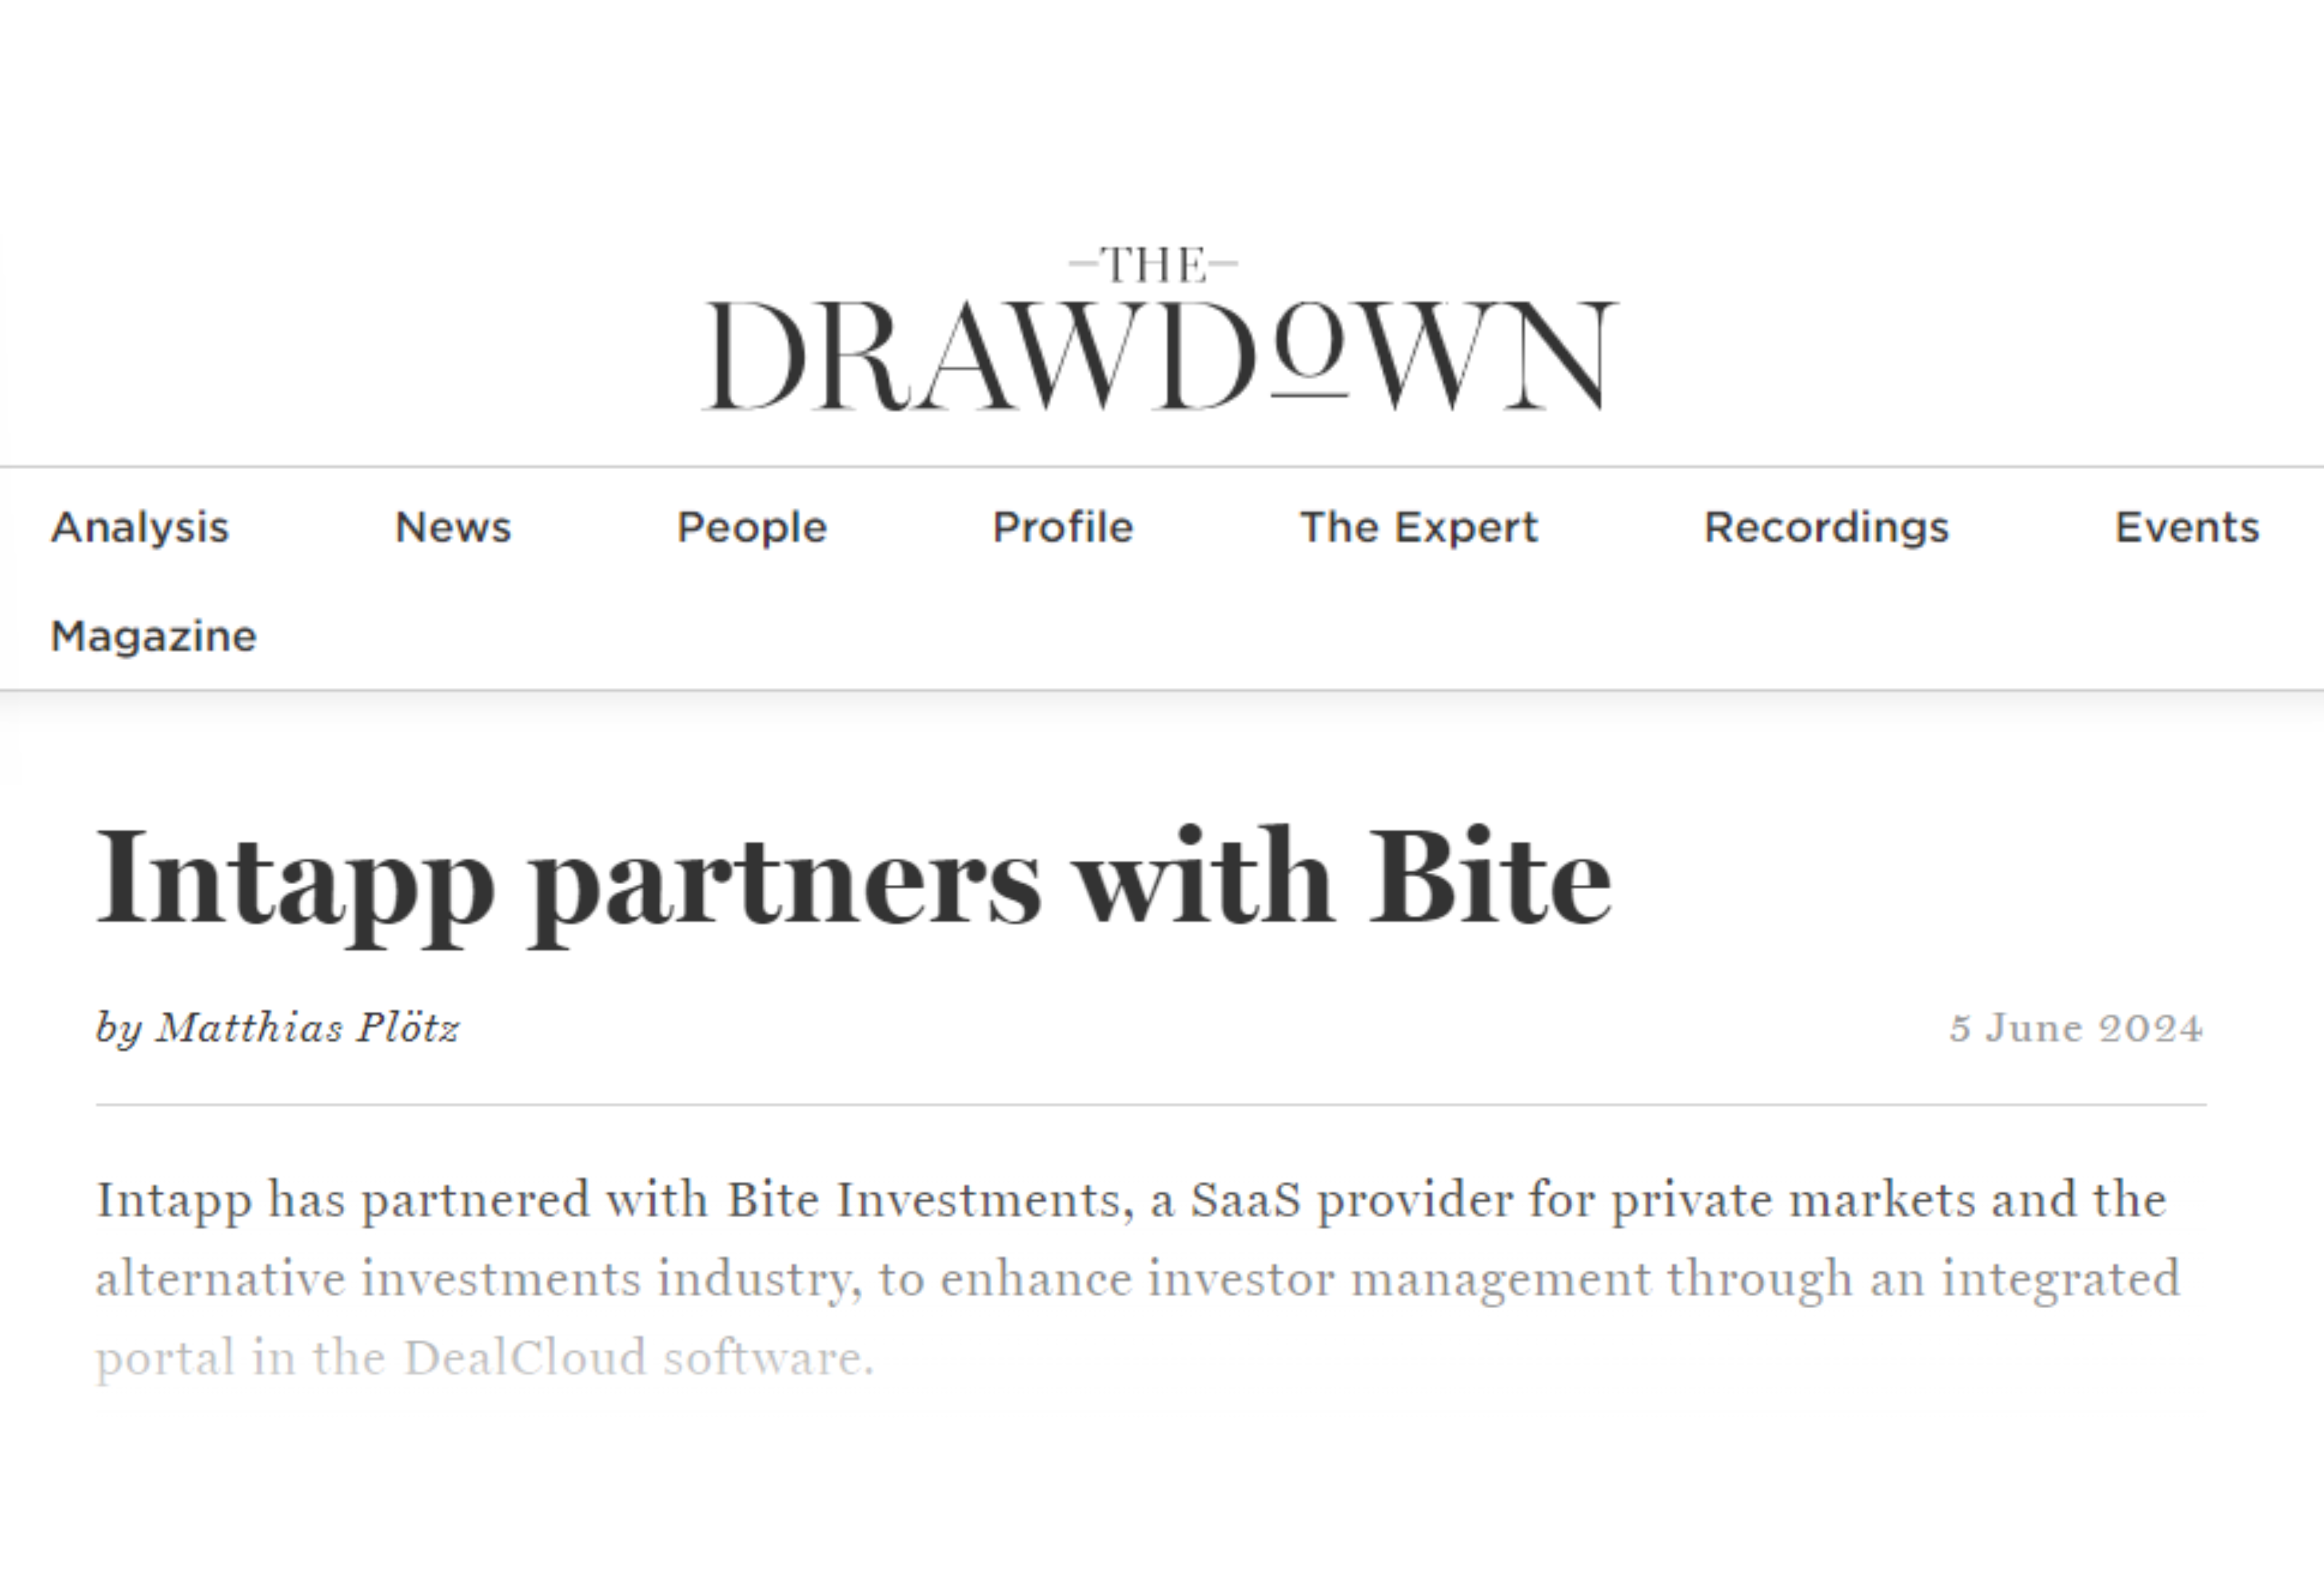 Bite Investments’ partnership announcement with Intapp features in The Drawdown, highlighting the integration between DealCloud and Bite Stream that provides Intapp DealCloud clients with an investor portal that enhances investor management.